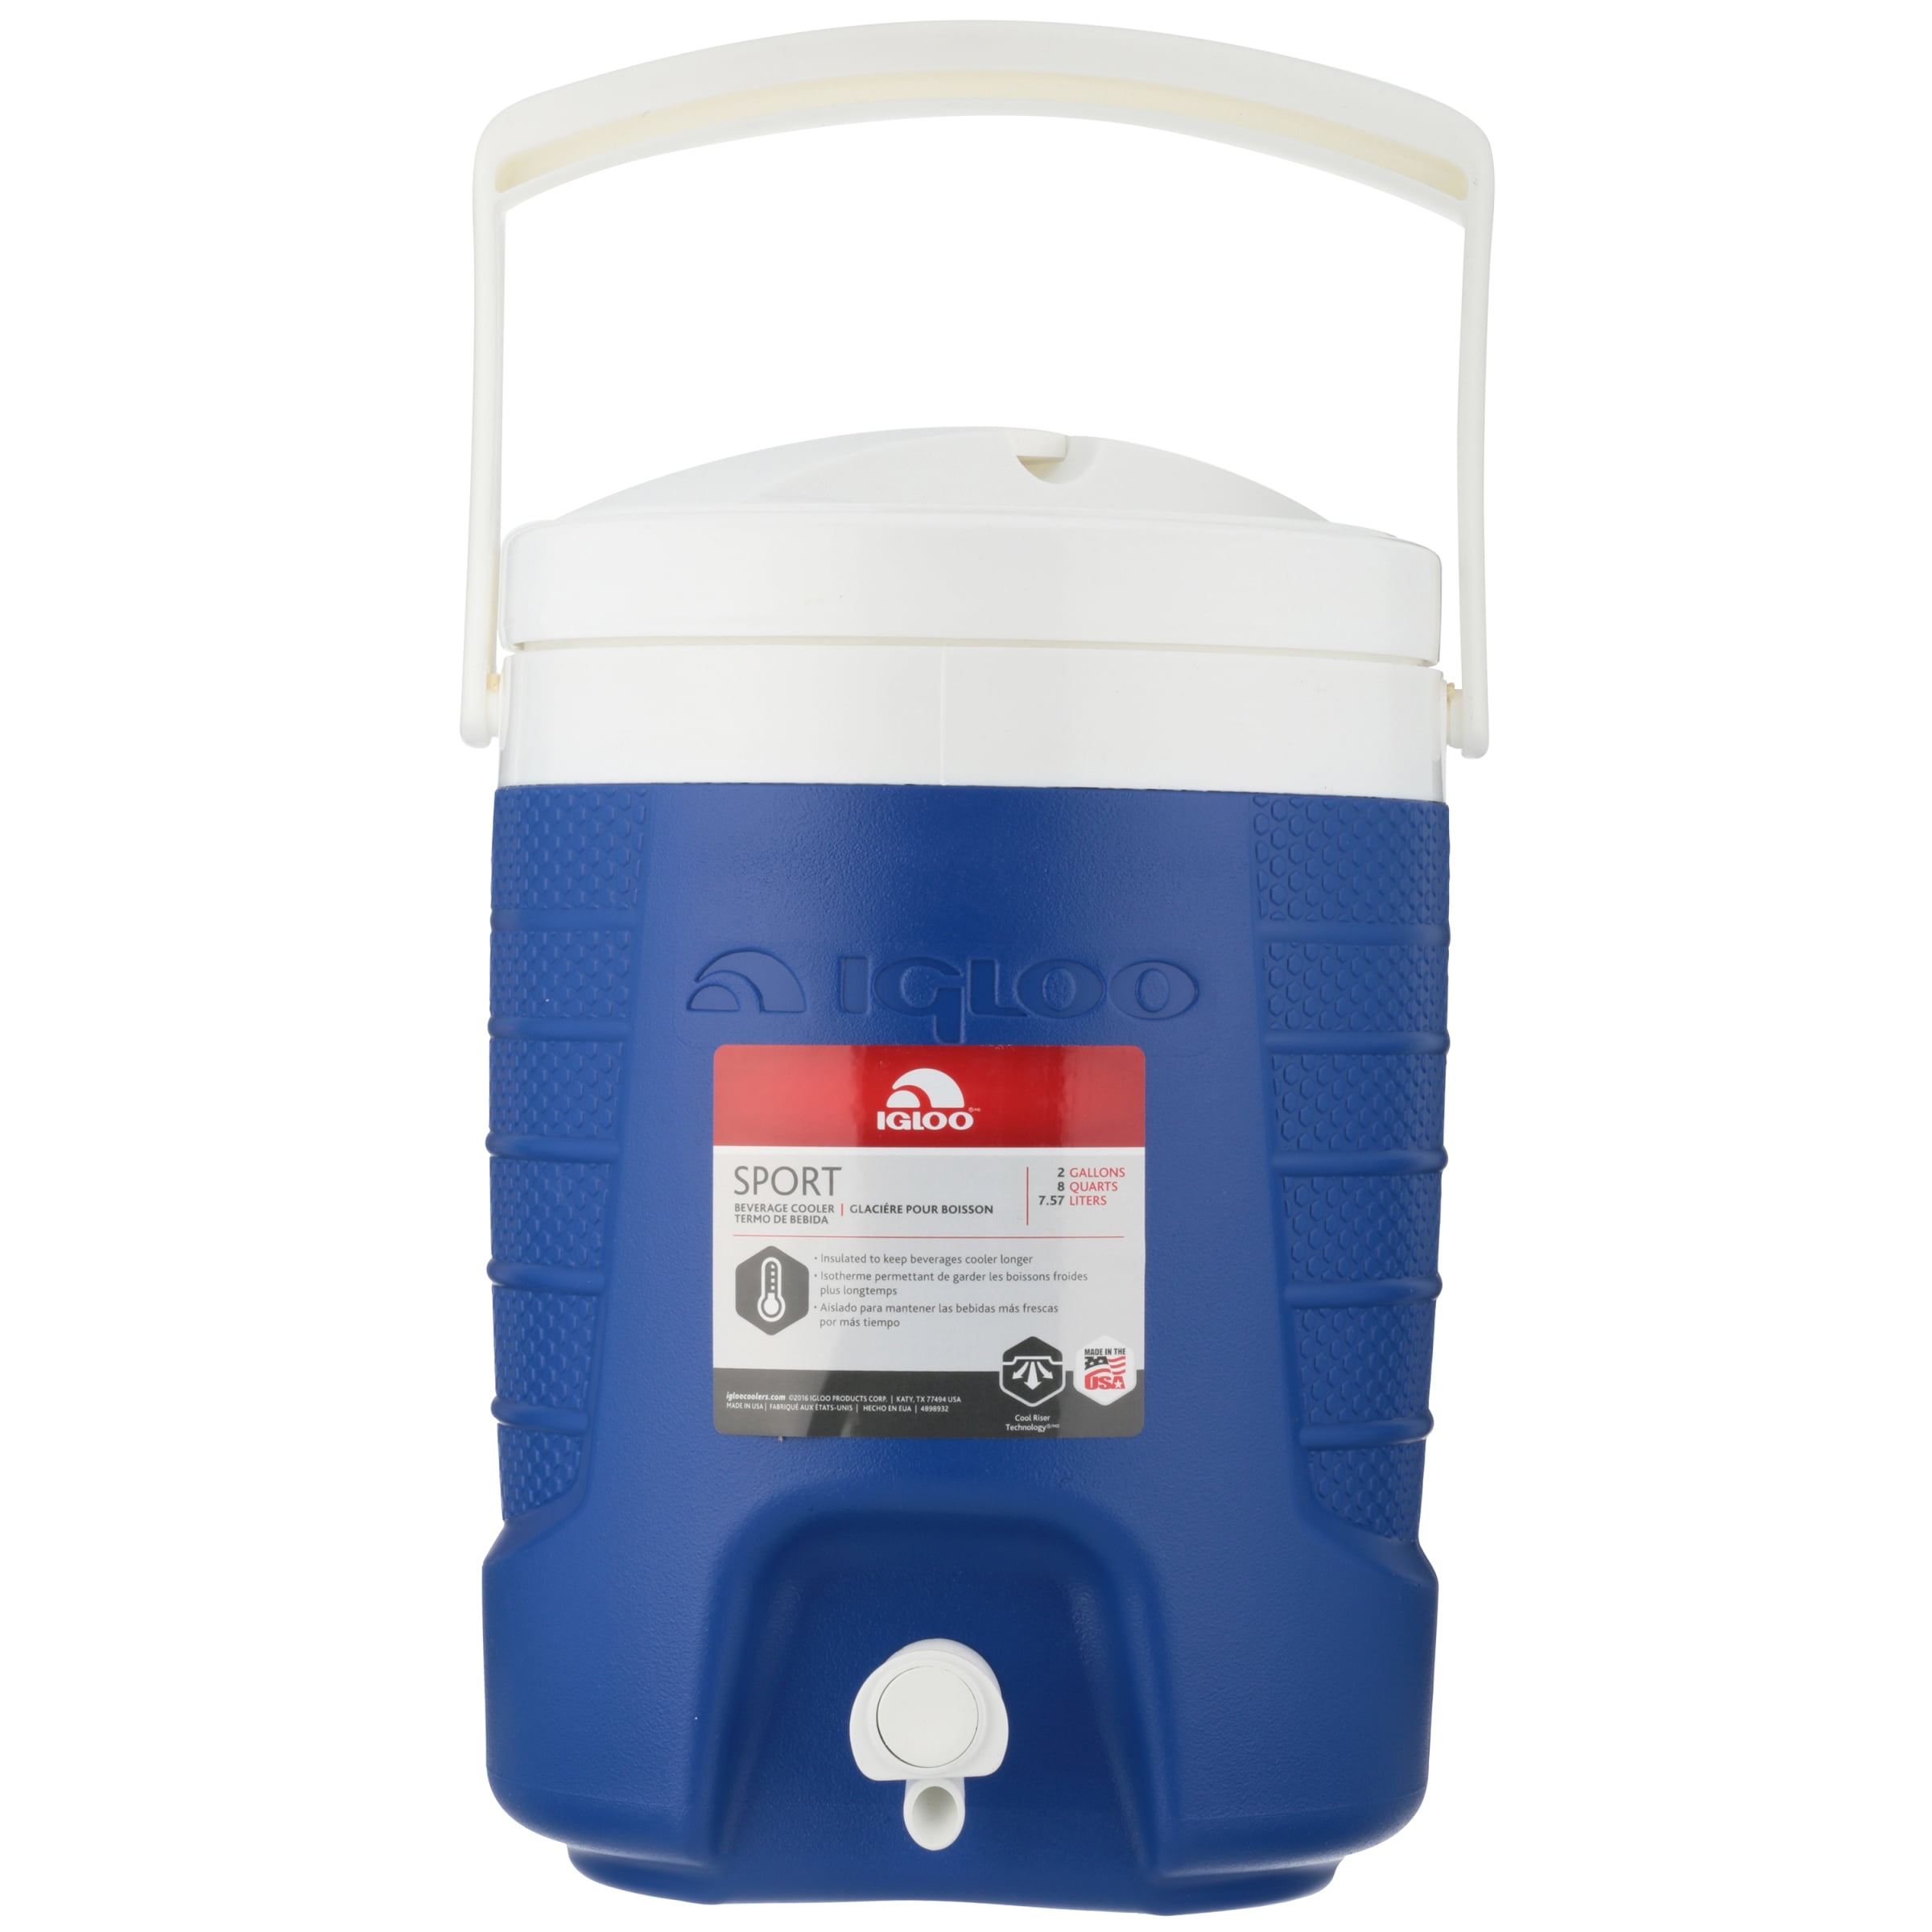 Igloo 2-Gallon (s) Beverage Cooler at